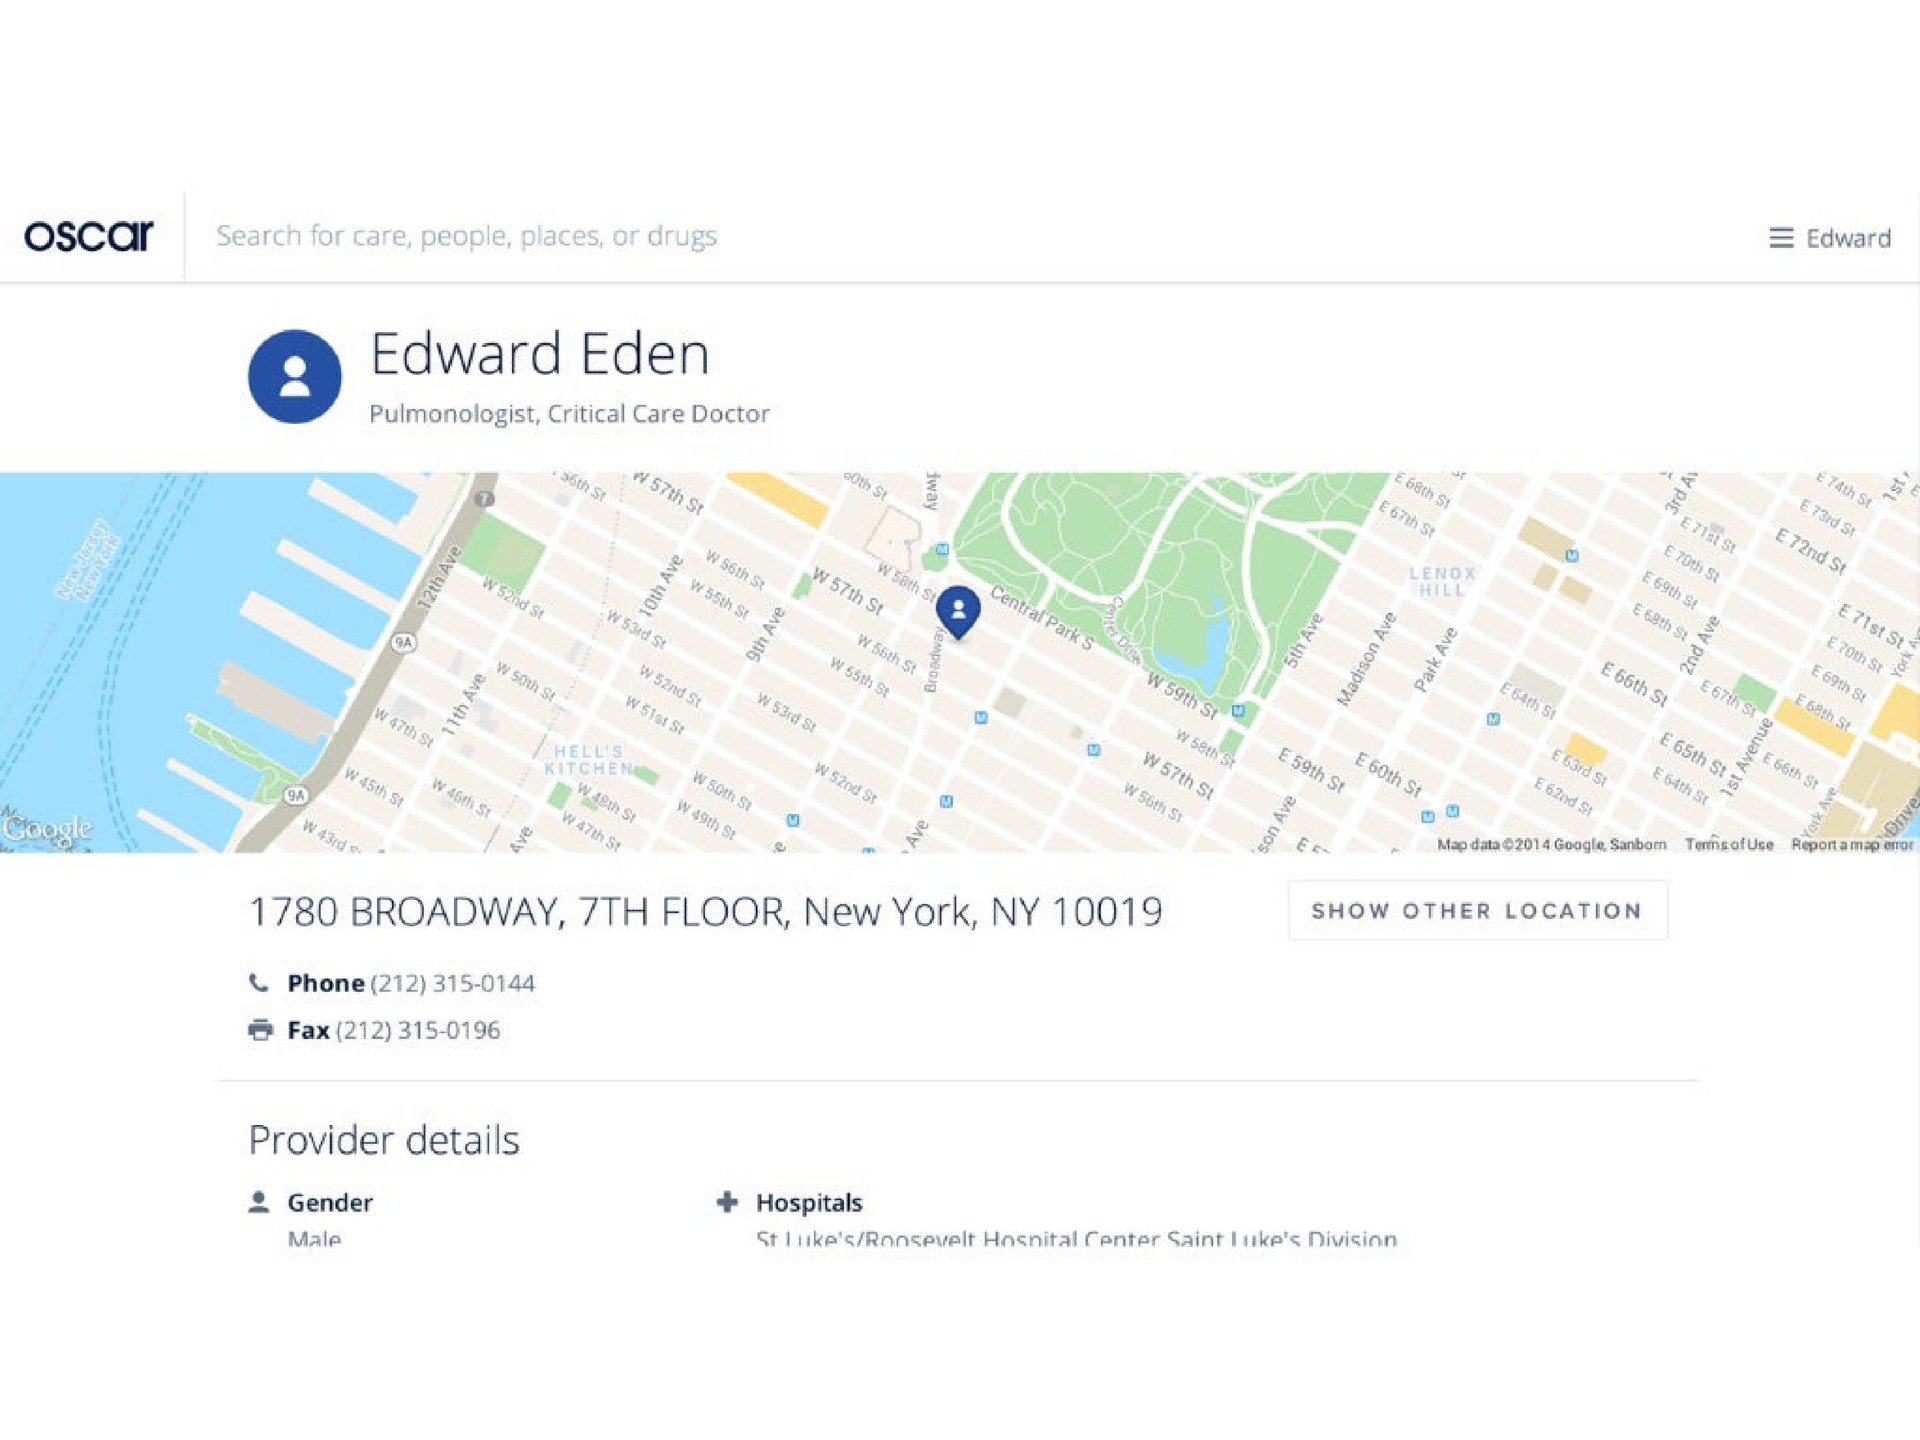 search for care people places or drugs a broadway floor new york provider details gender hospitals | Oscar Health